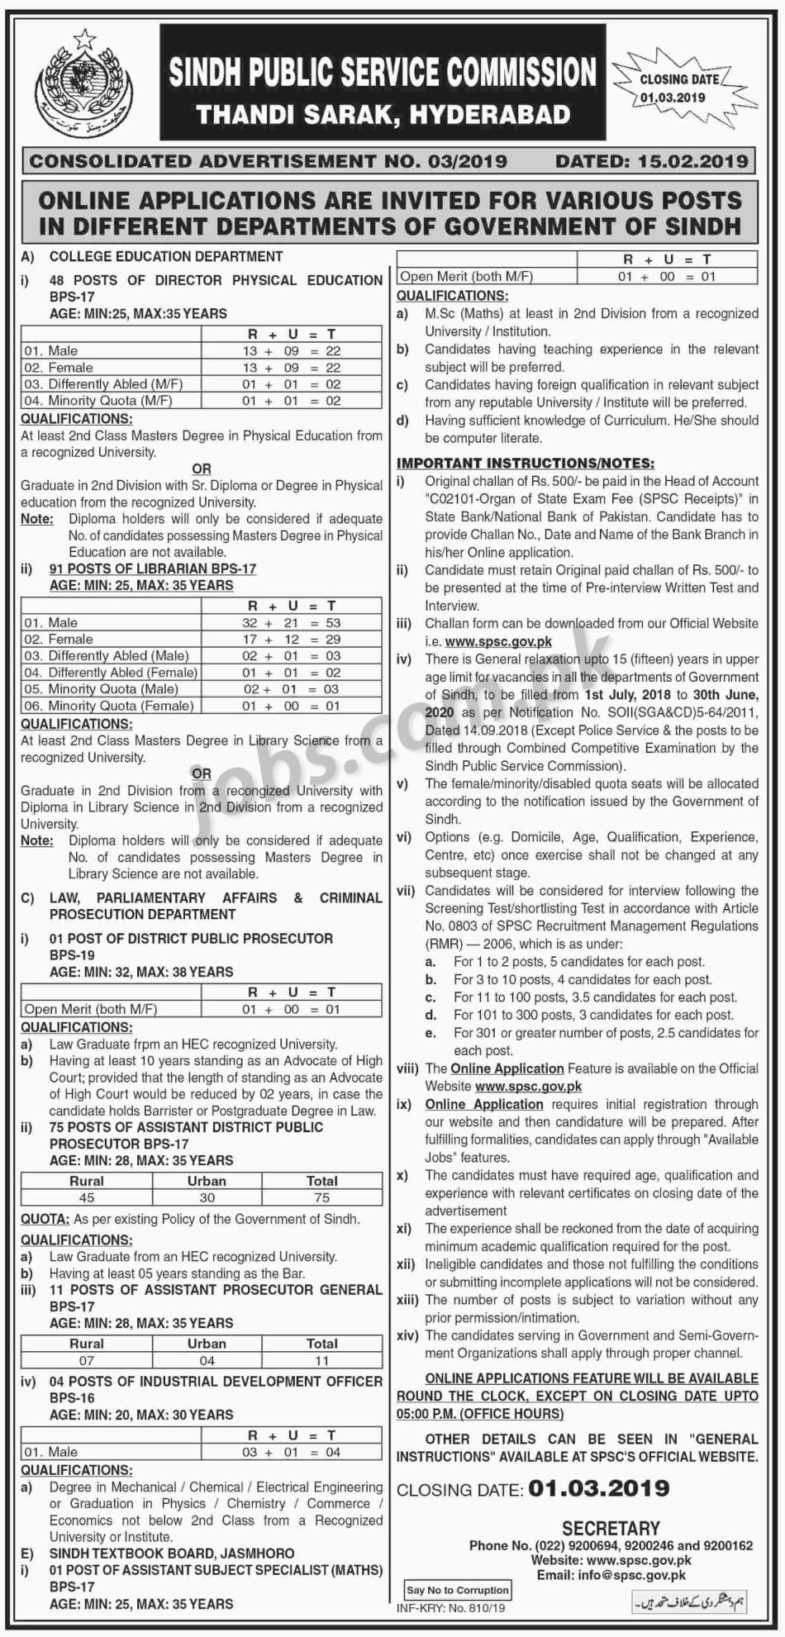 SPSC Jobs 3/2019: 231+ Librarians, Asst District Public Prosecutors, DPS, PG, DPE & Other Posts in Sindh Government Departments